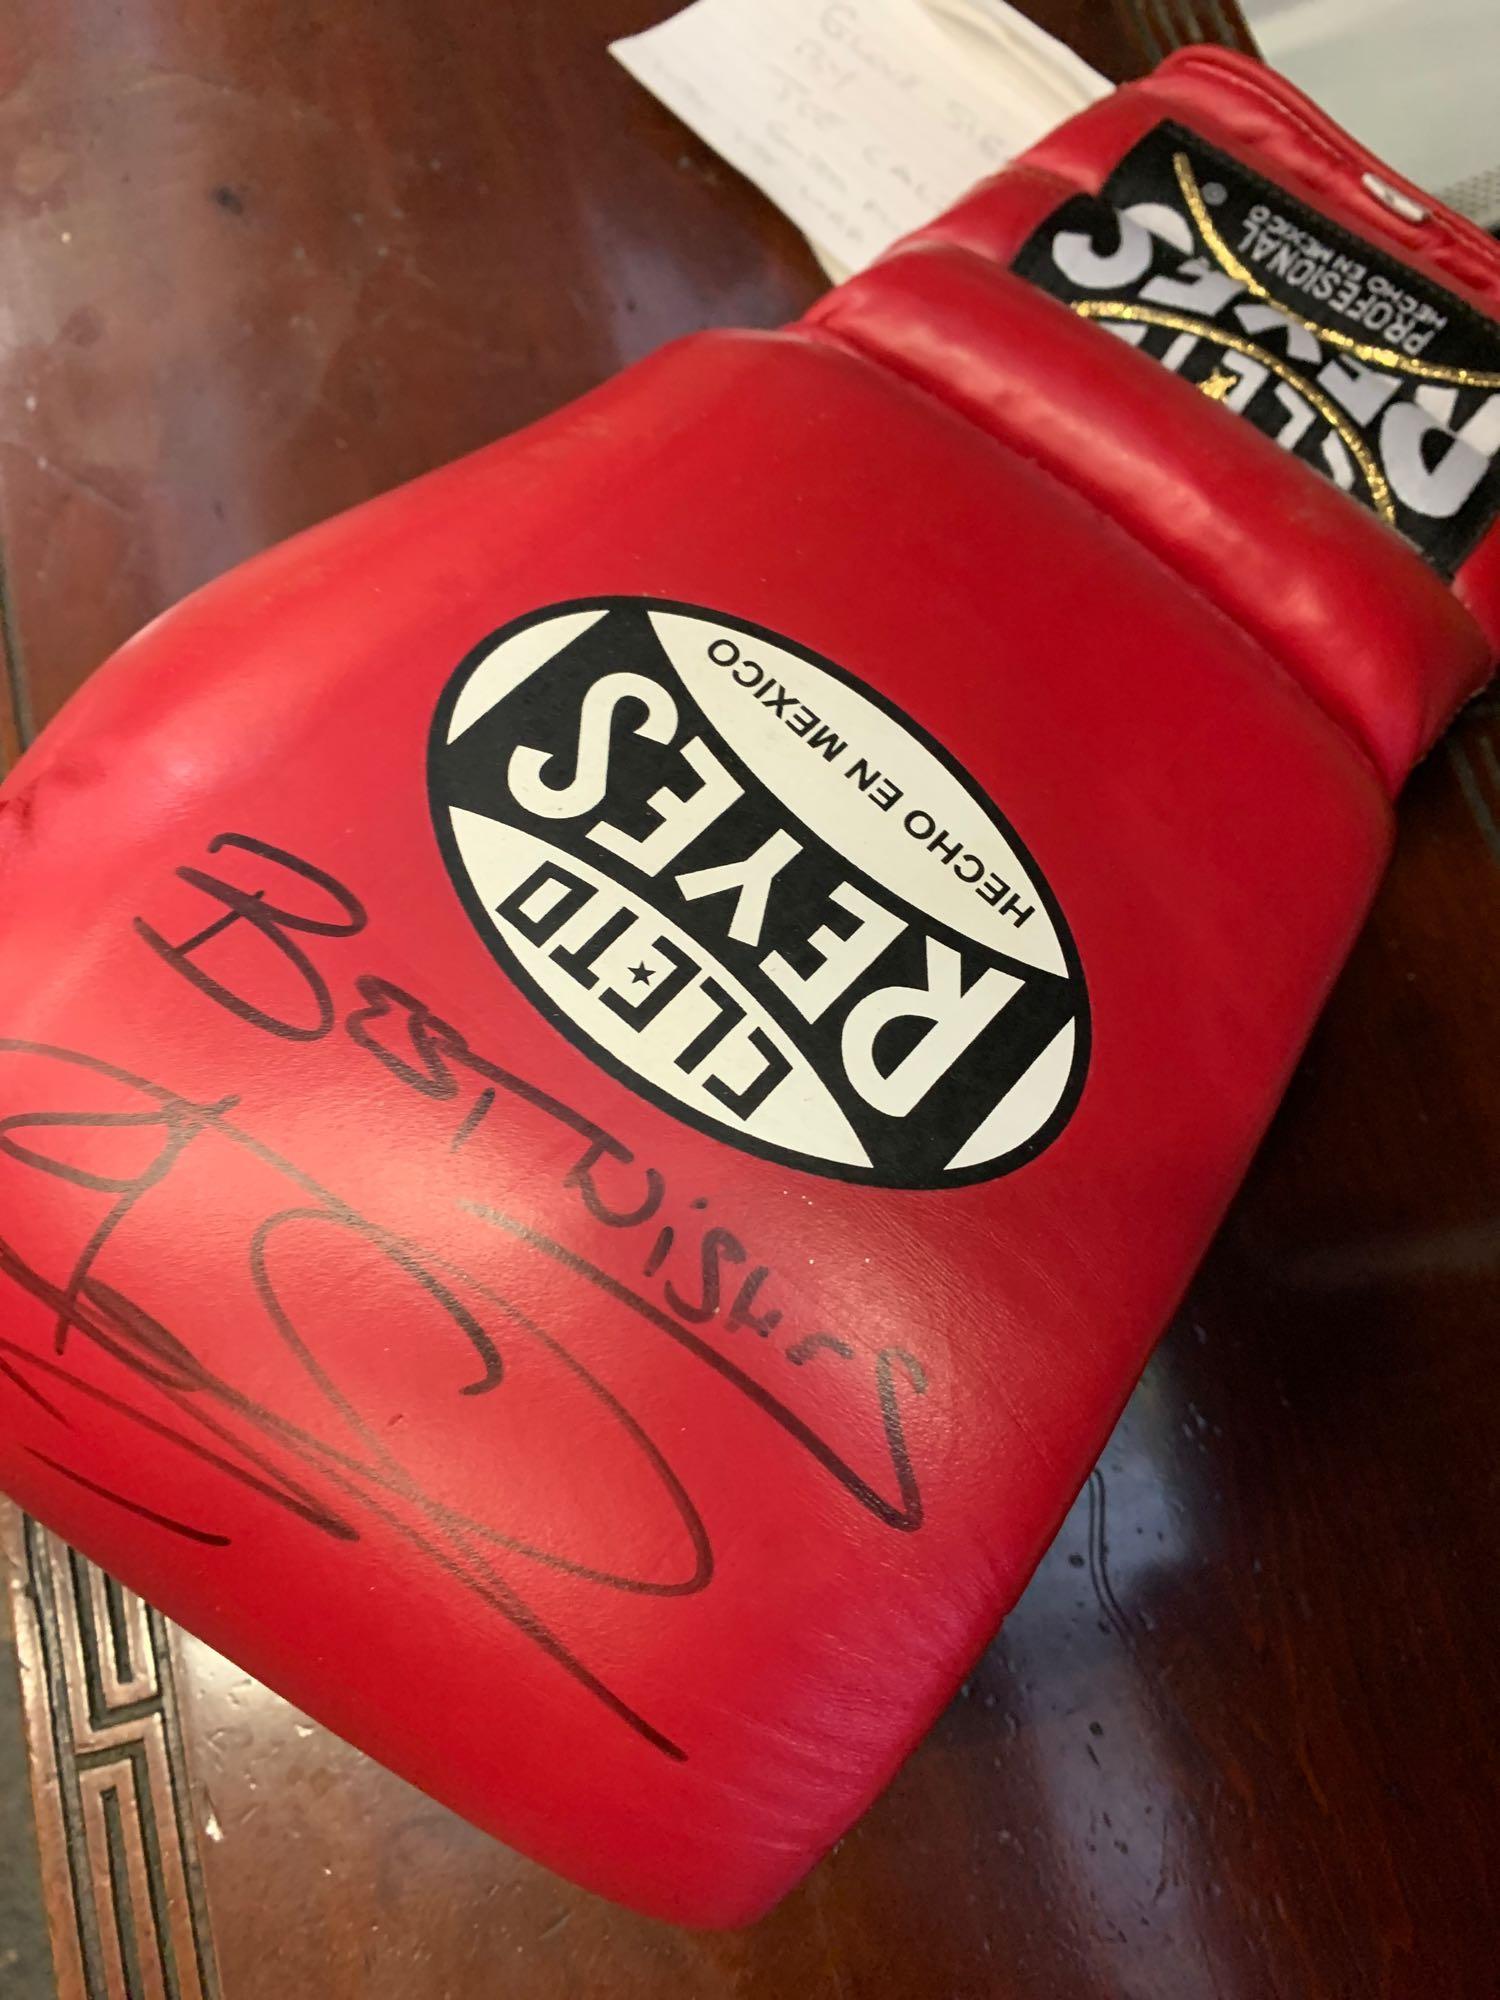 Signed boxing glove. This item carries VAT. - Image 3 of 3